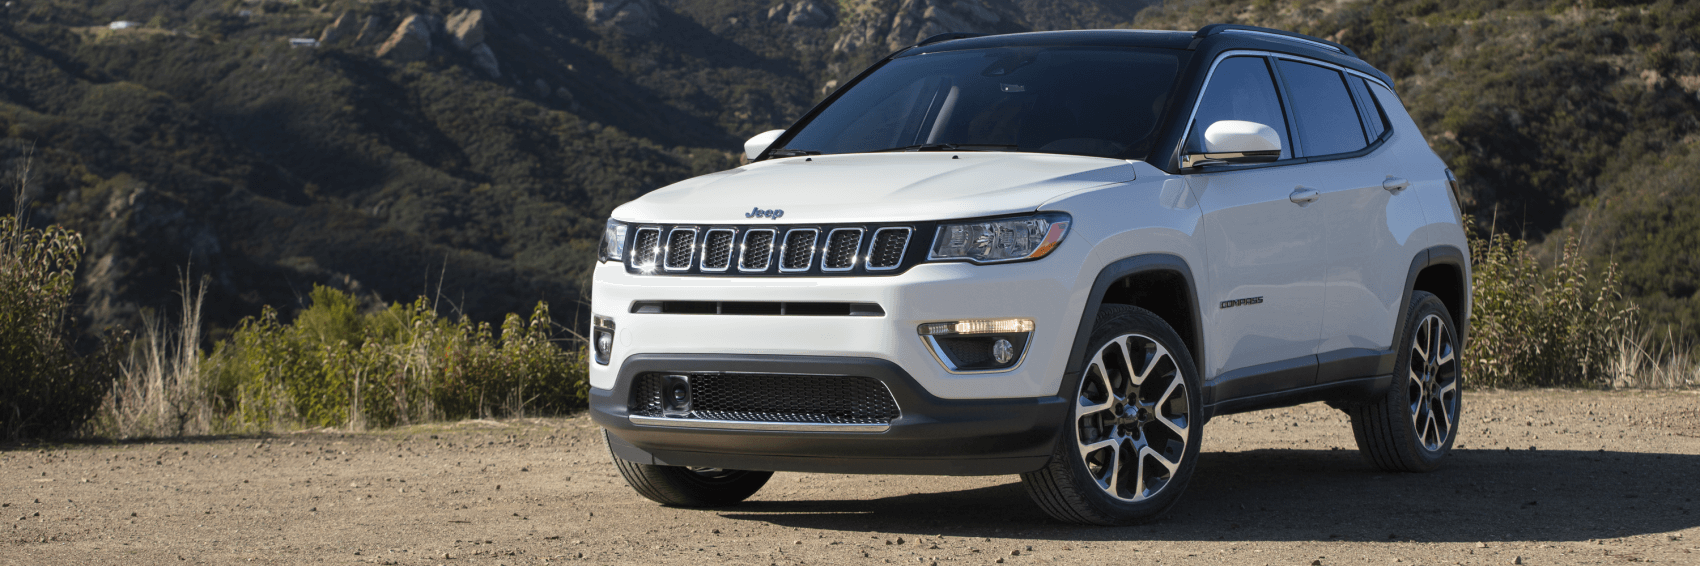 2021 Jeep Compass Limited White Mountains Scranton DCJR